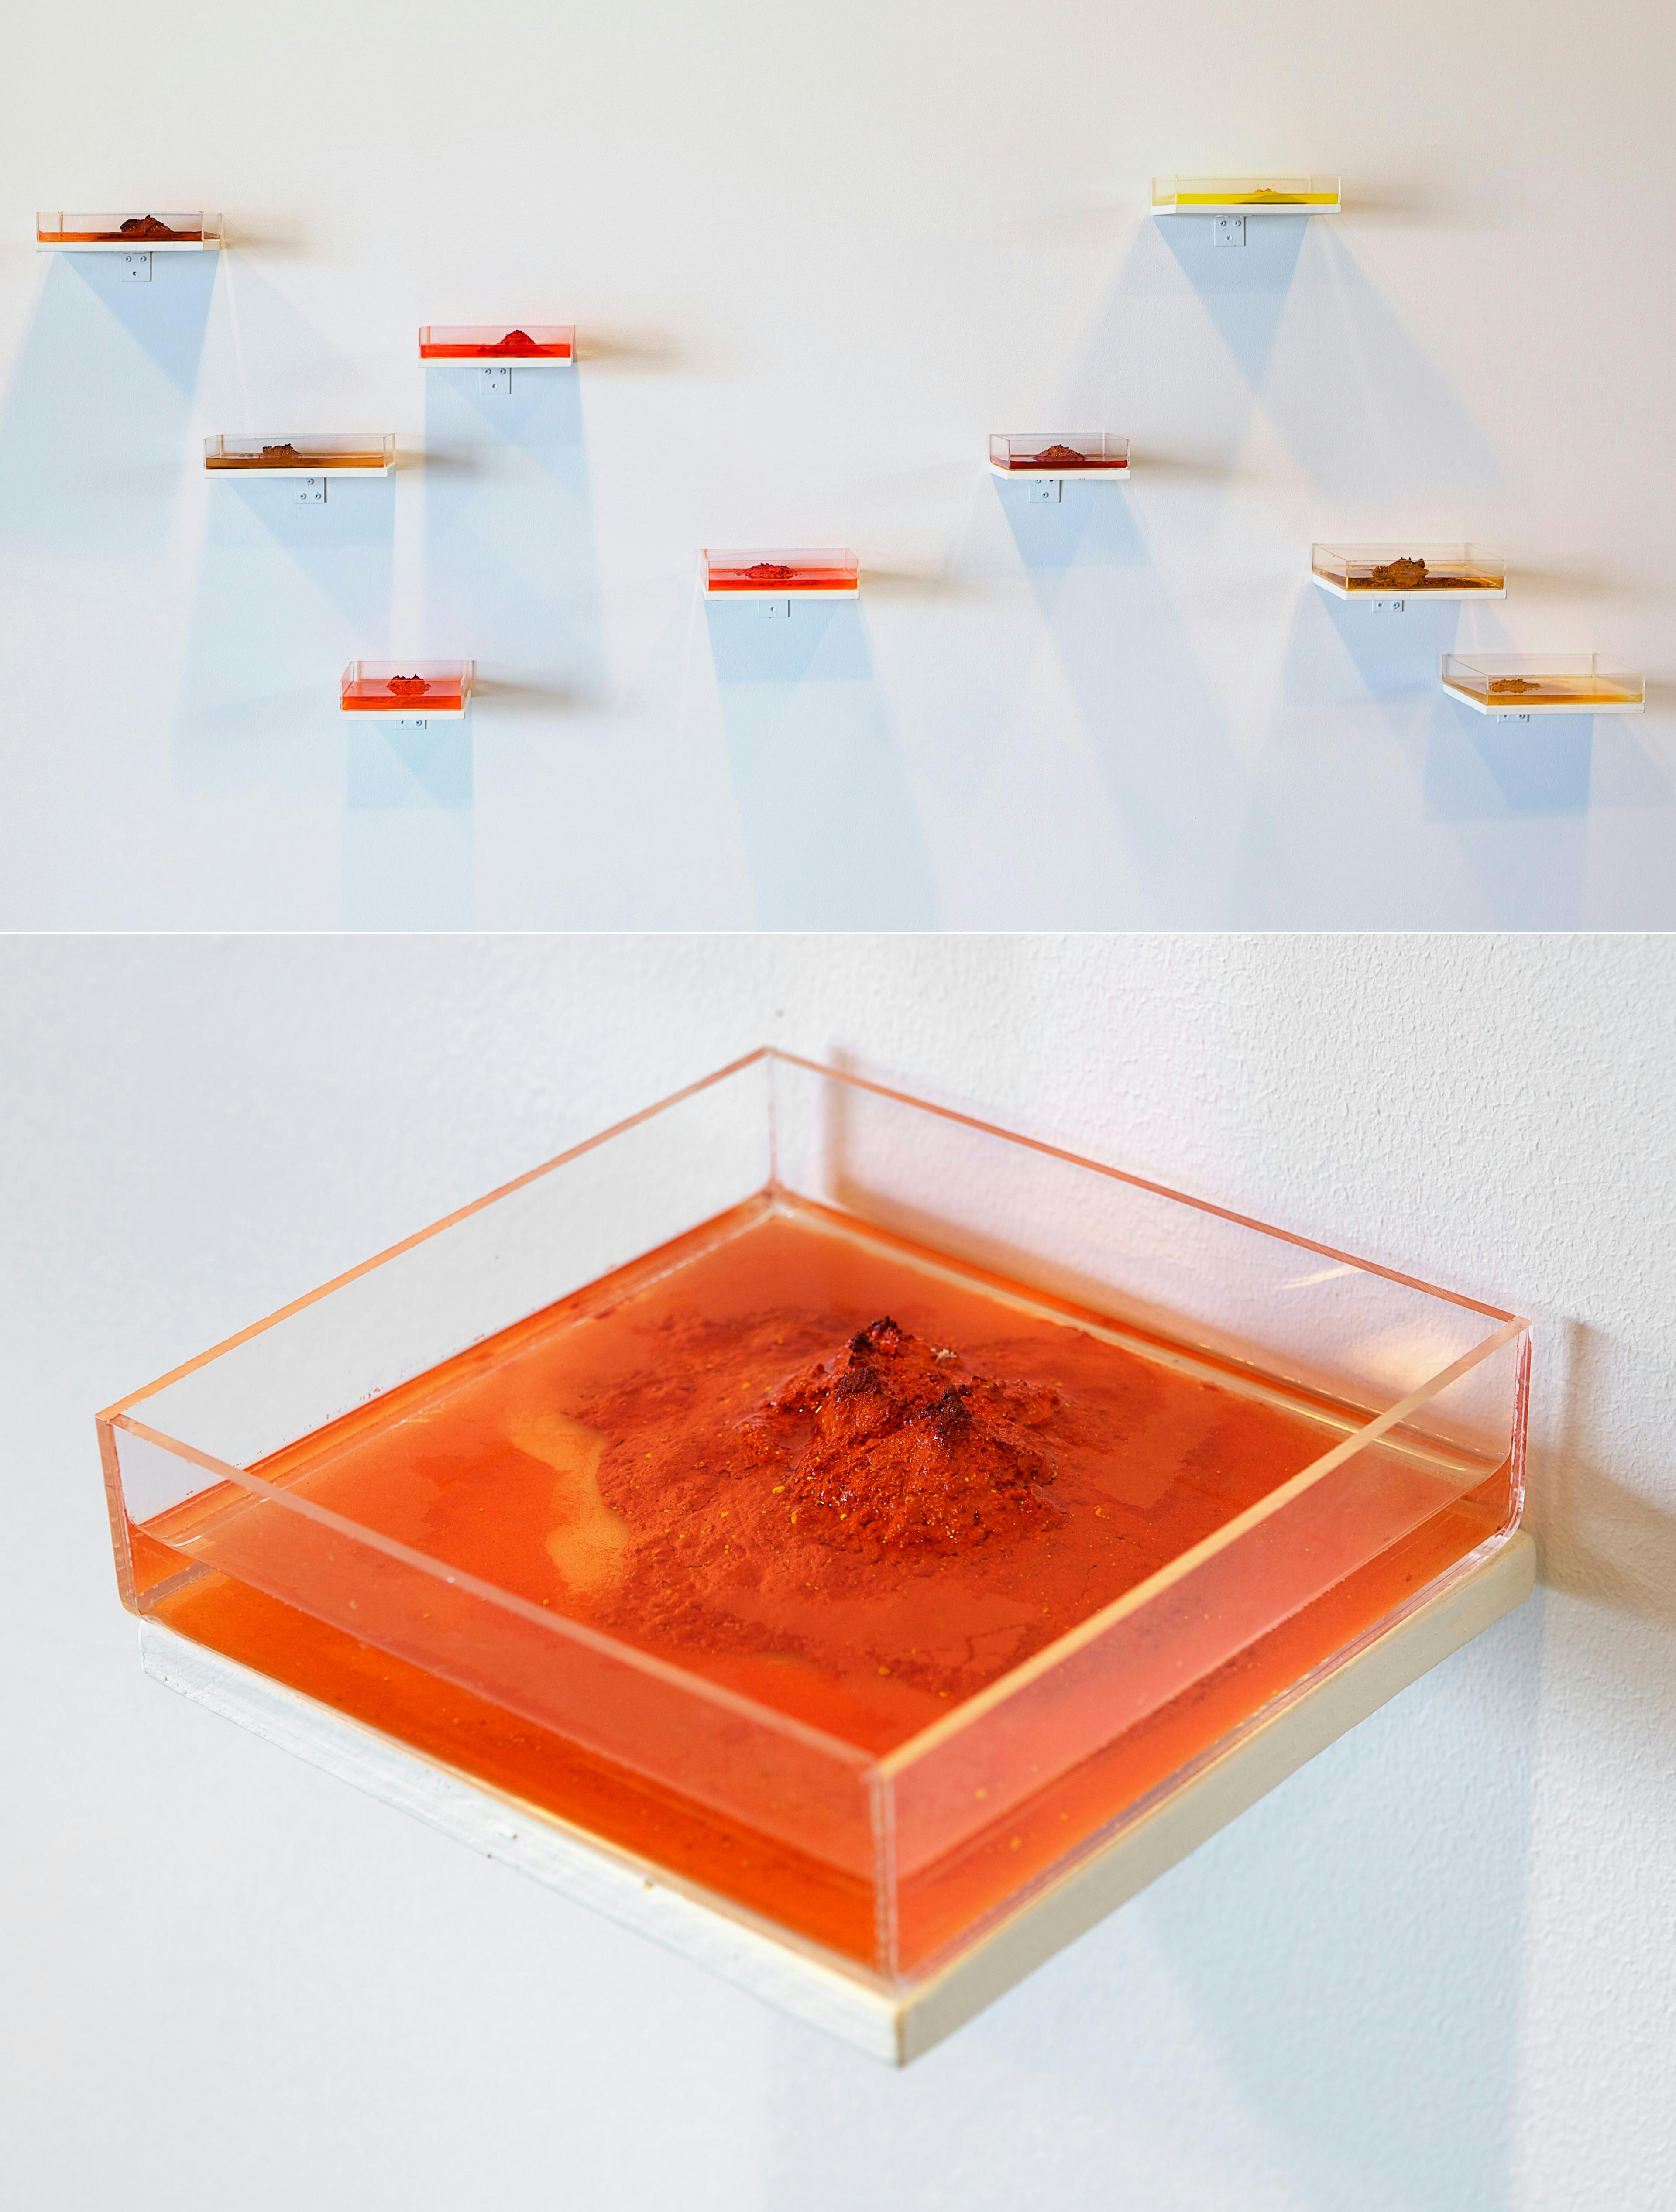 Gunilla Hansson's work Pigment Islands, square containers with water and piles of pigment + detail